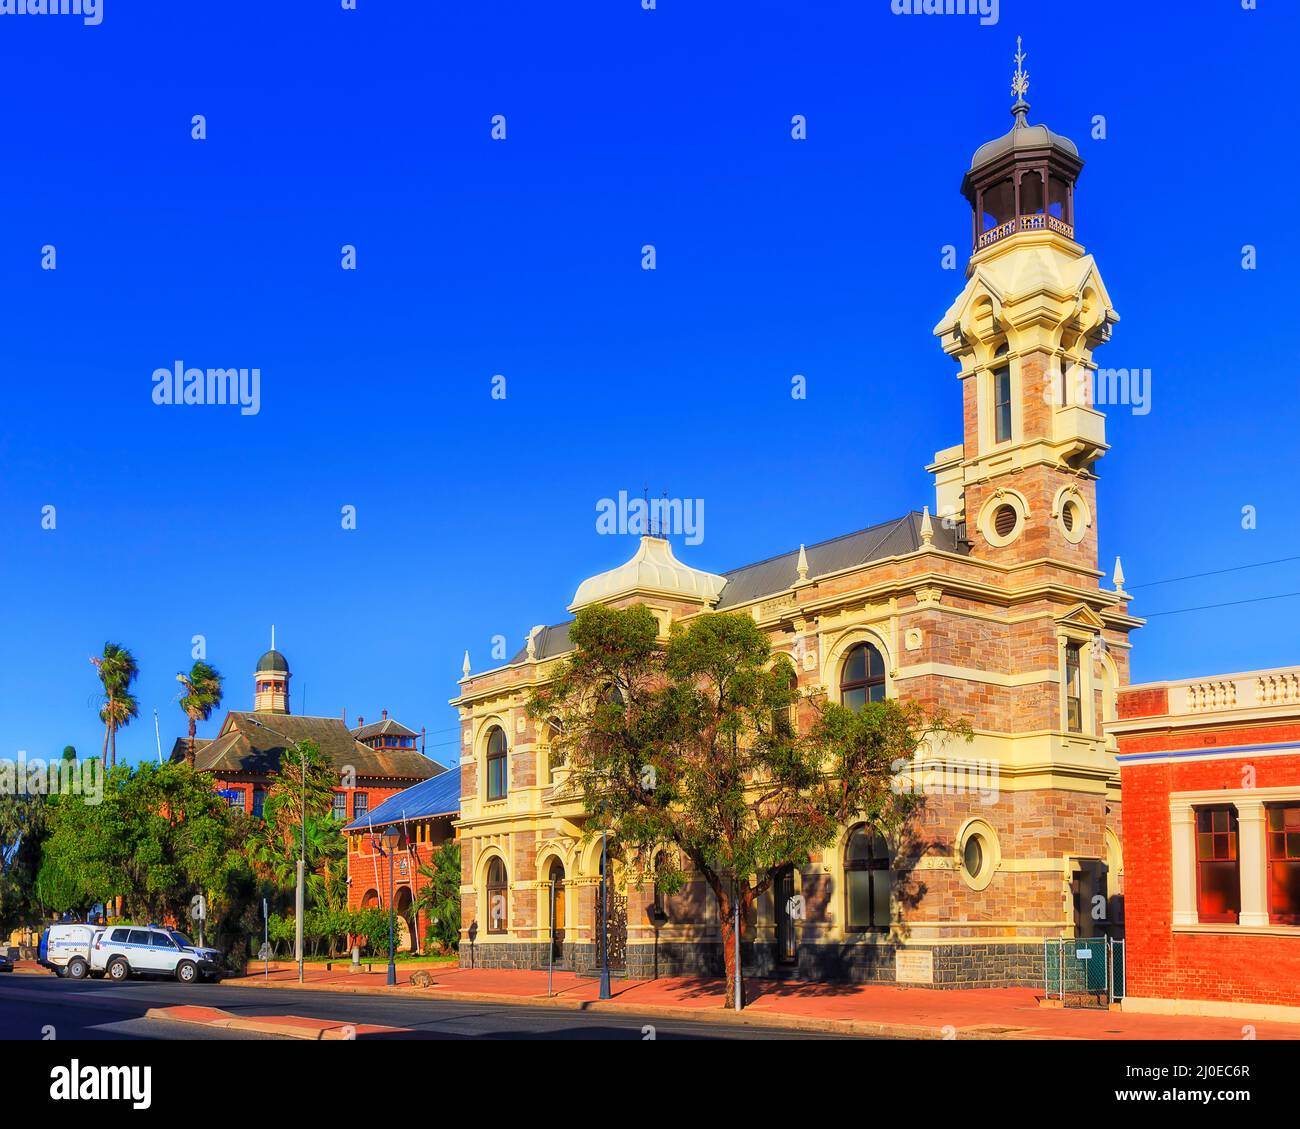 Historic town hall building in Silver City Broken hill mining outback centre in Australia on Argent street. Stock Photo